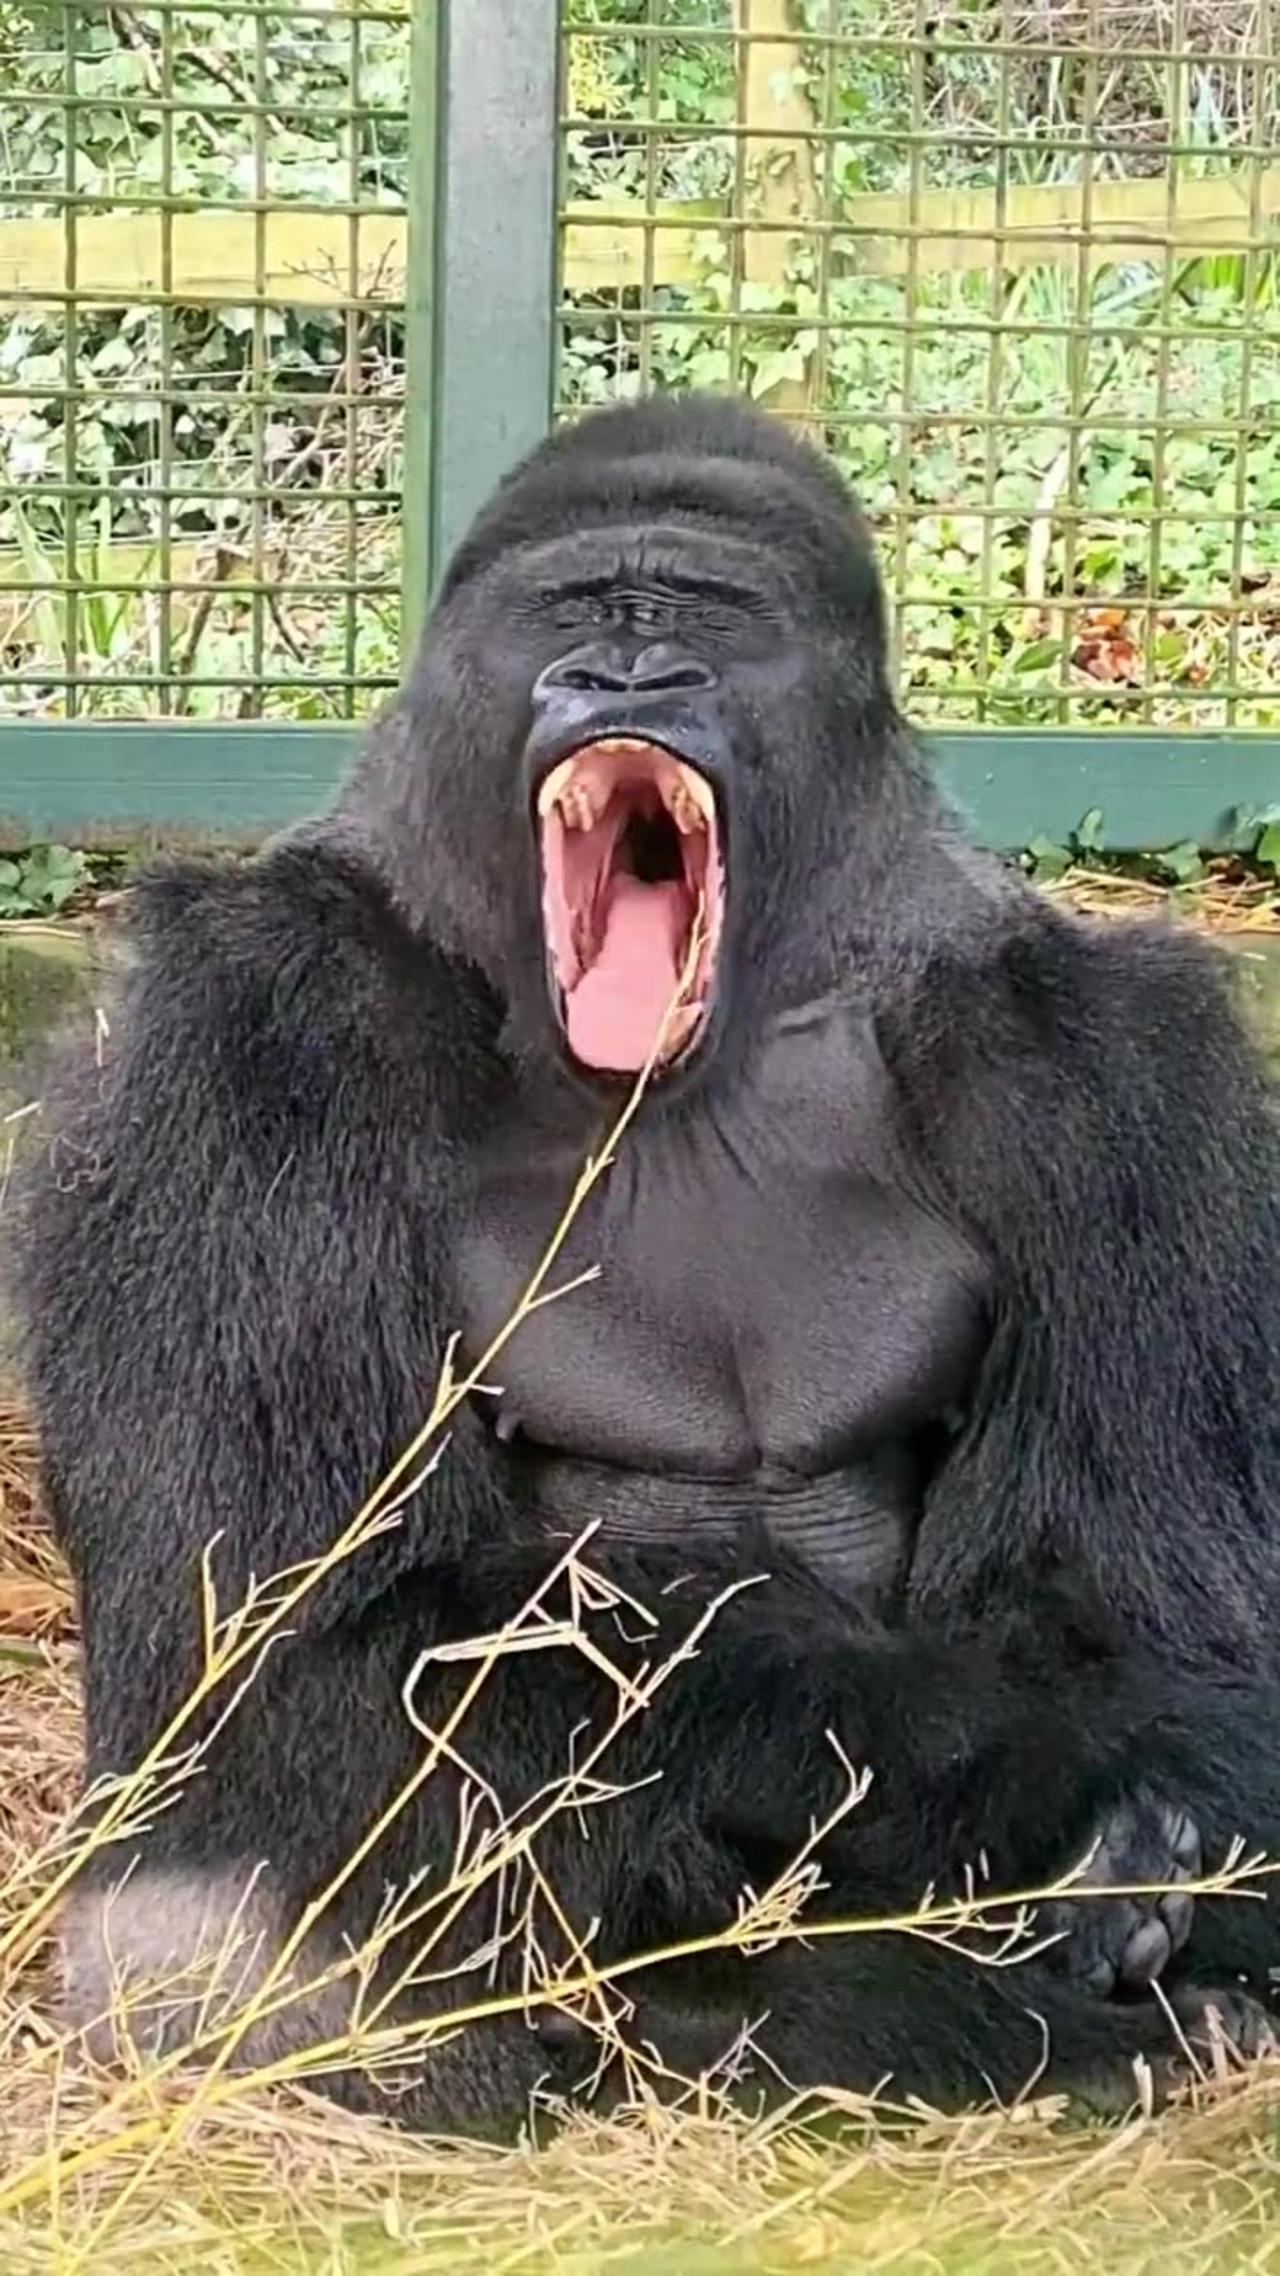 I bet you can't get through this video without yawning! #silverback #gorilla #yawnchallenge